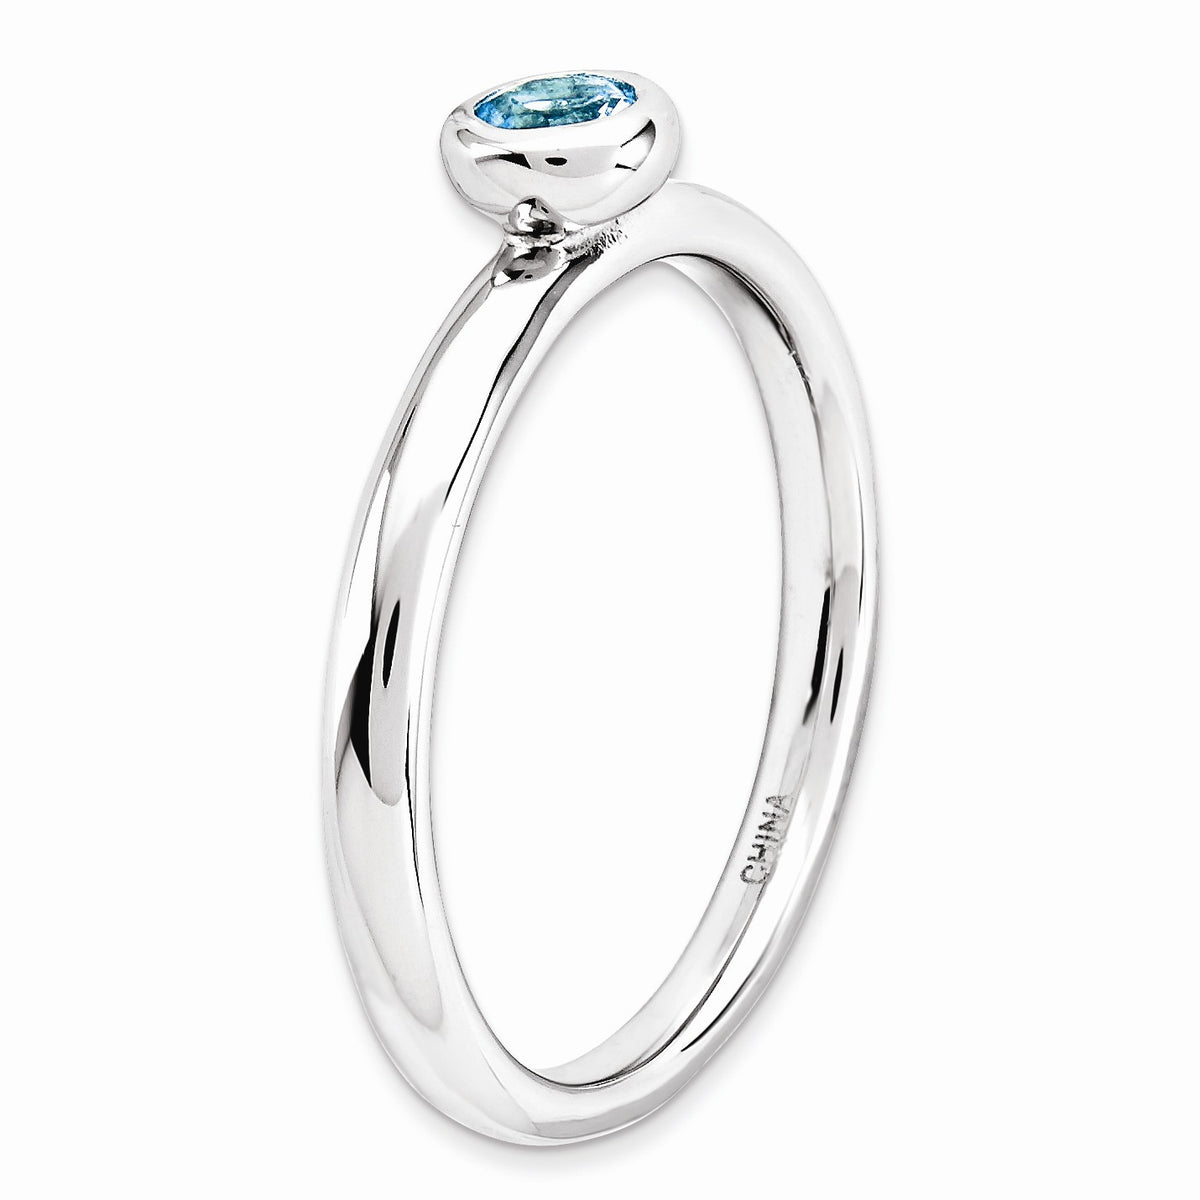 Alternate view of the Stackable Low Profile 4mm Blue Topaz Silver Ring by The Black Bow Jewelry Co.